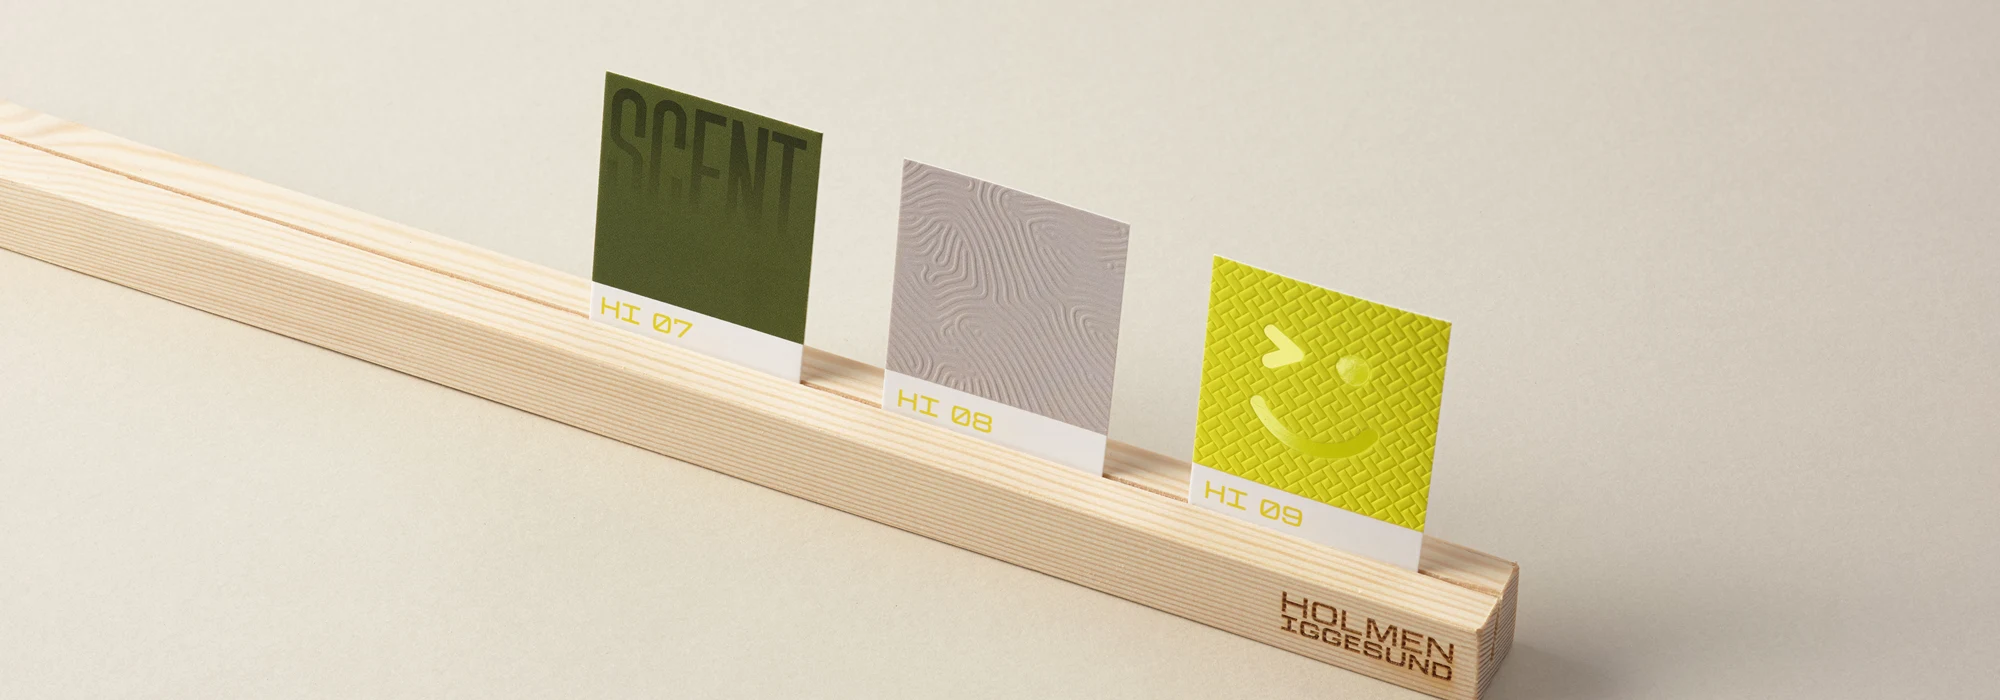 Colourful paperboard sample cards in a holder on a grey background